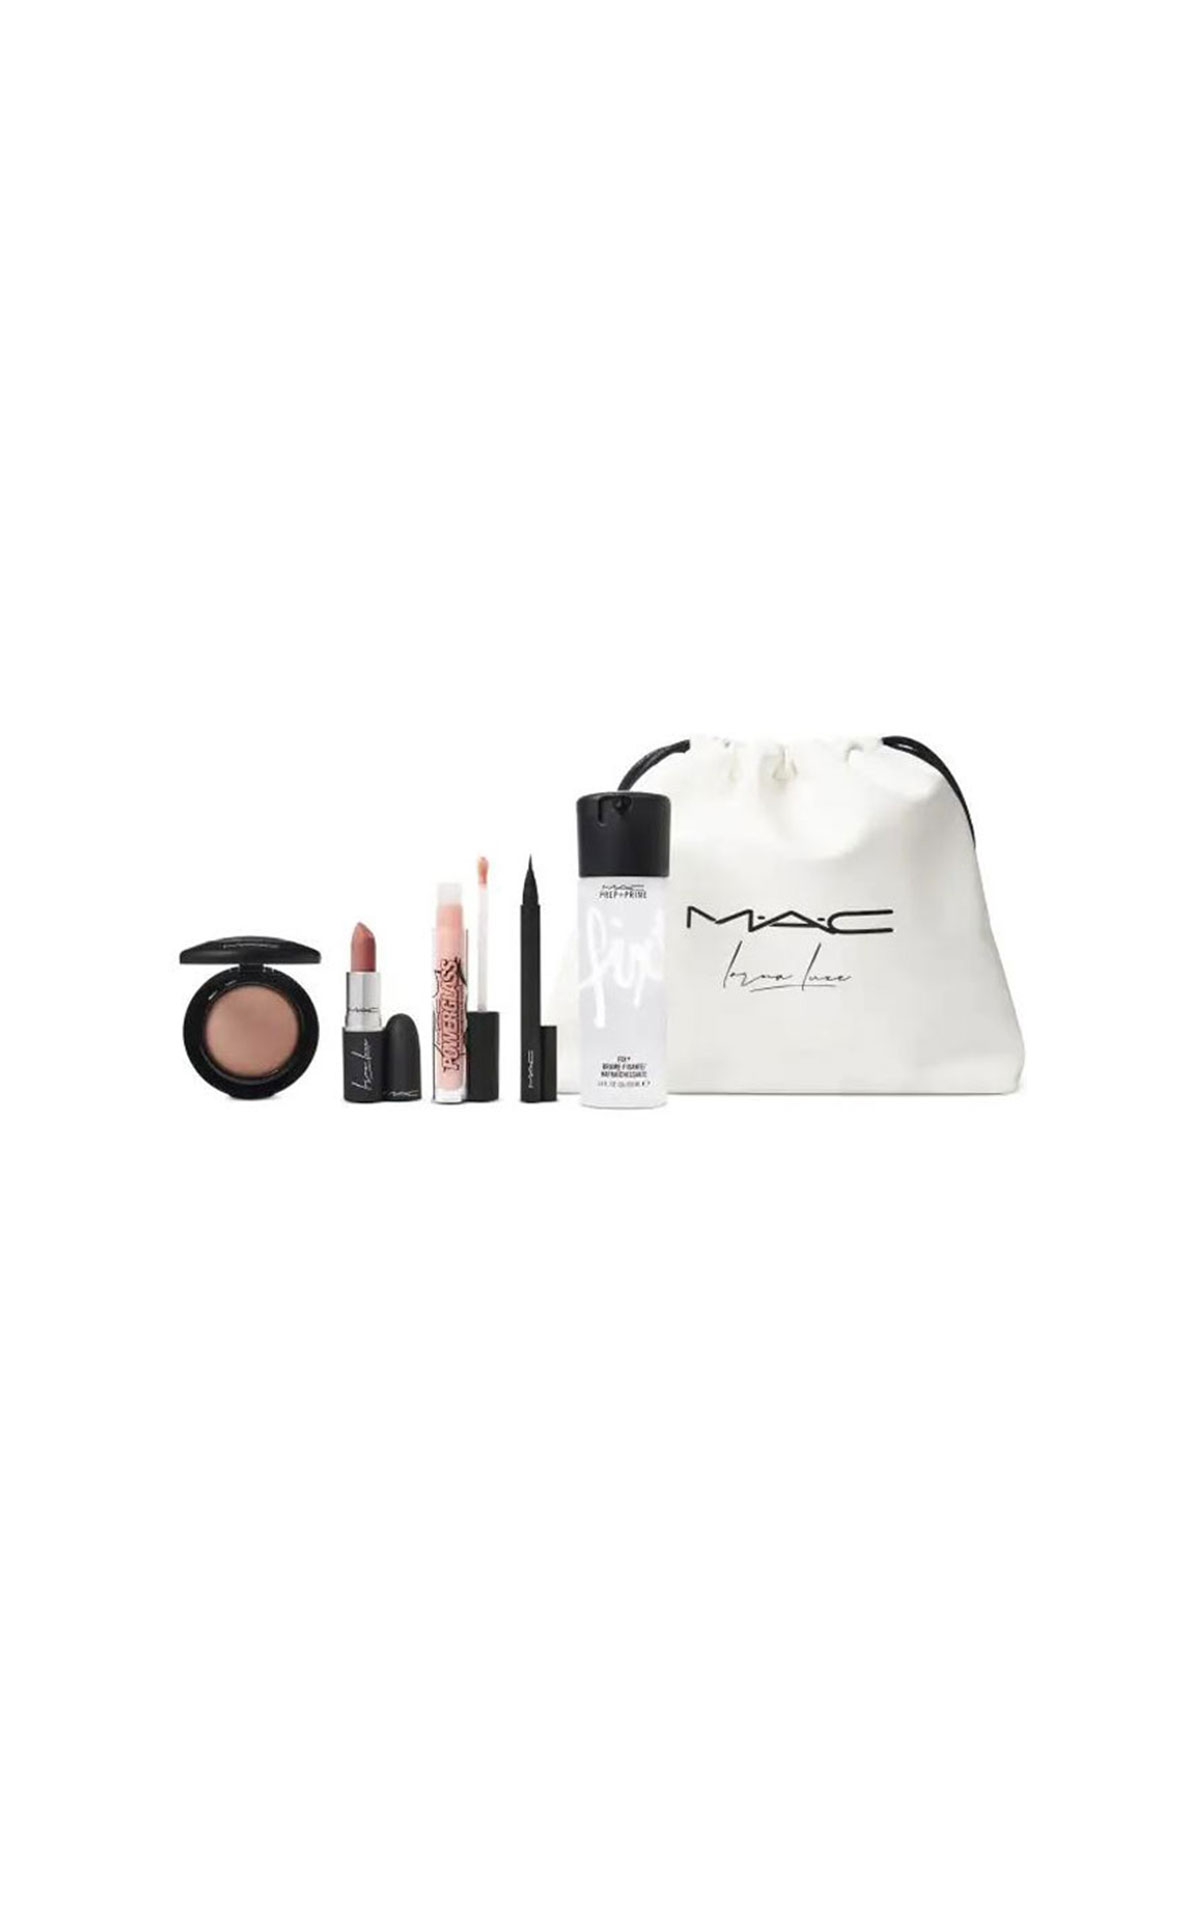 The Cosmetics Company Store Mac Lorna luxe set from Bicester Village